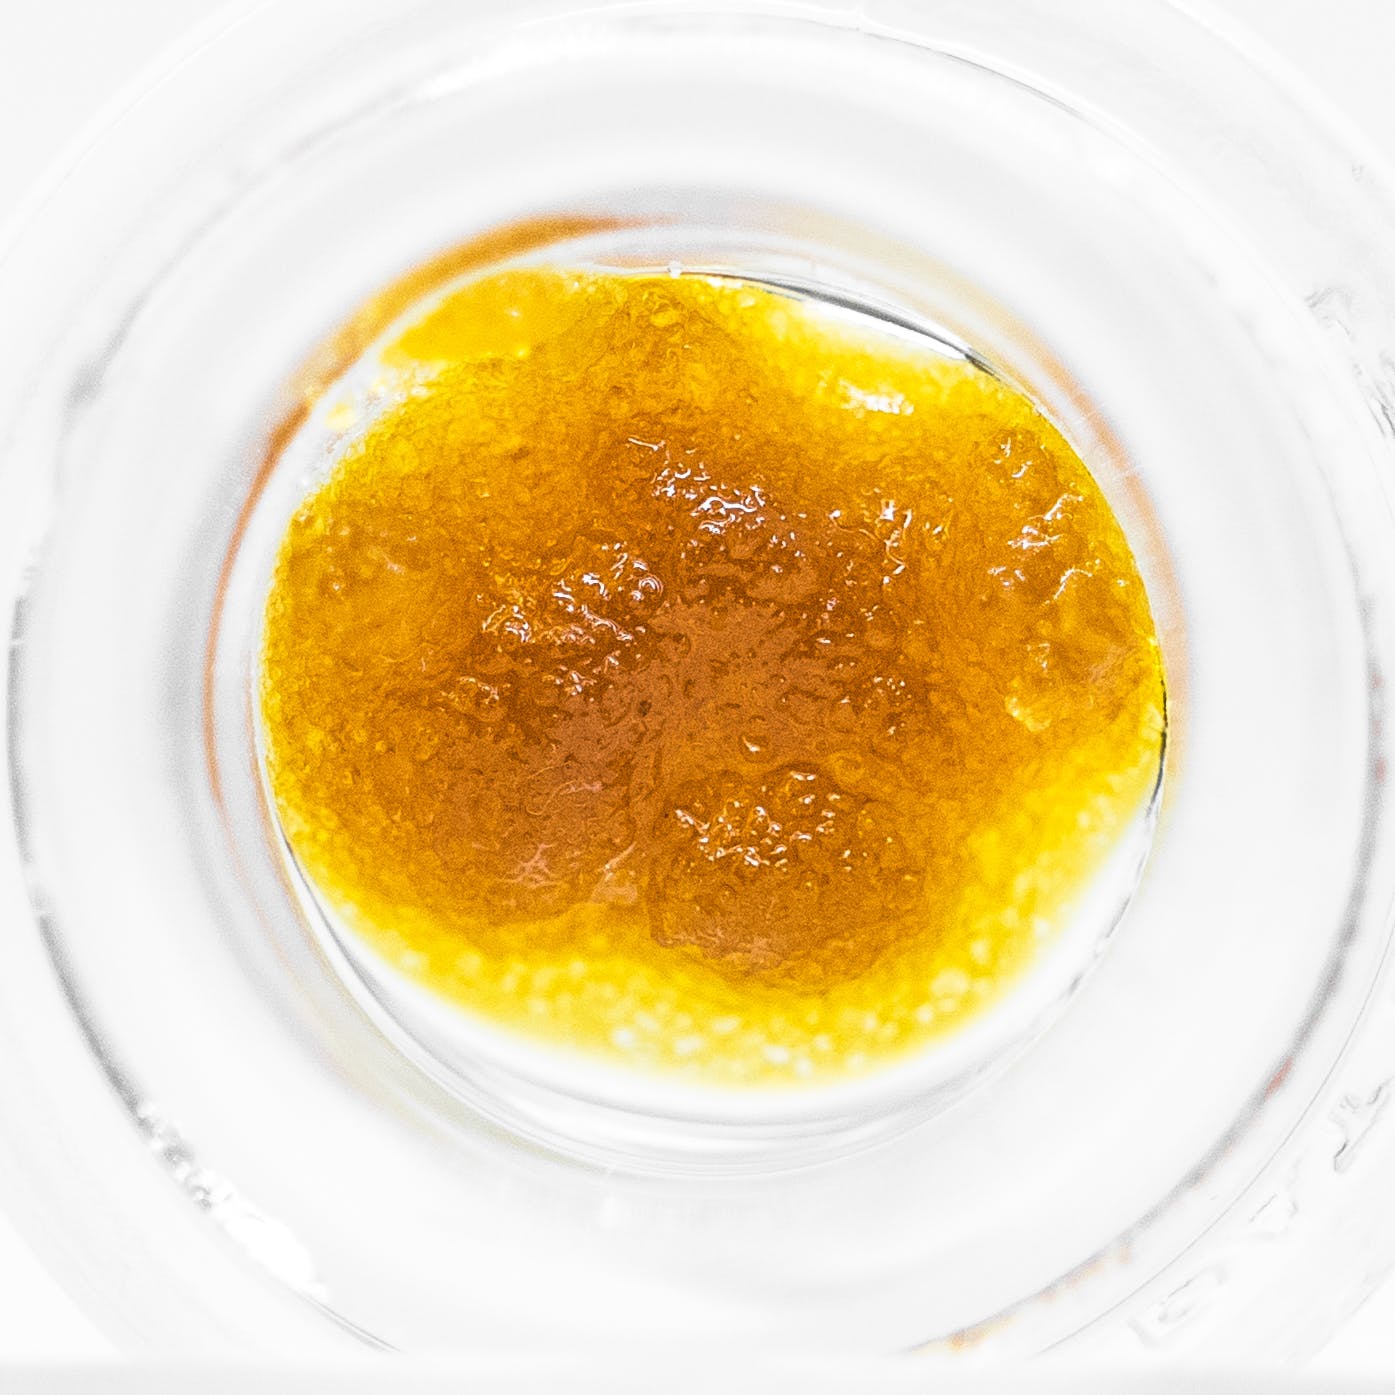 concentrate-2445-csc-dream-cola-live-resin-ih-88-32-25-buy-one-2c-get-one-50-25-off